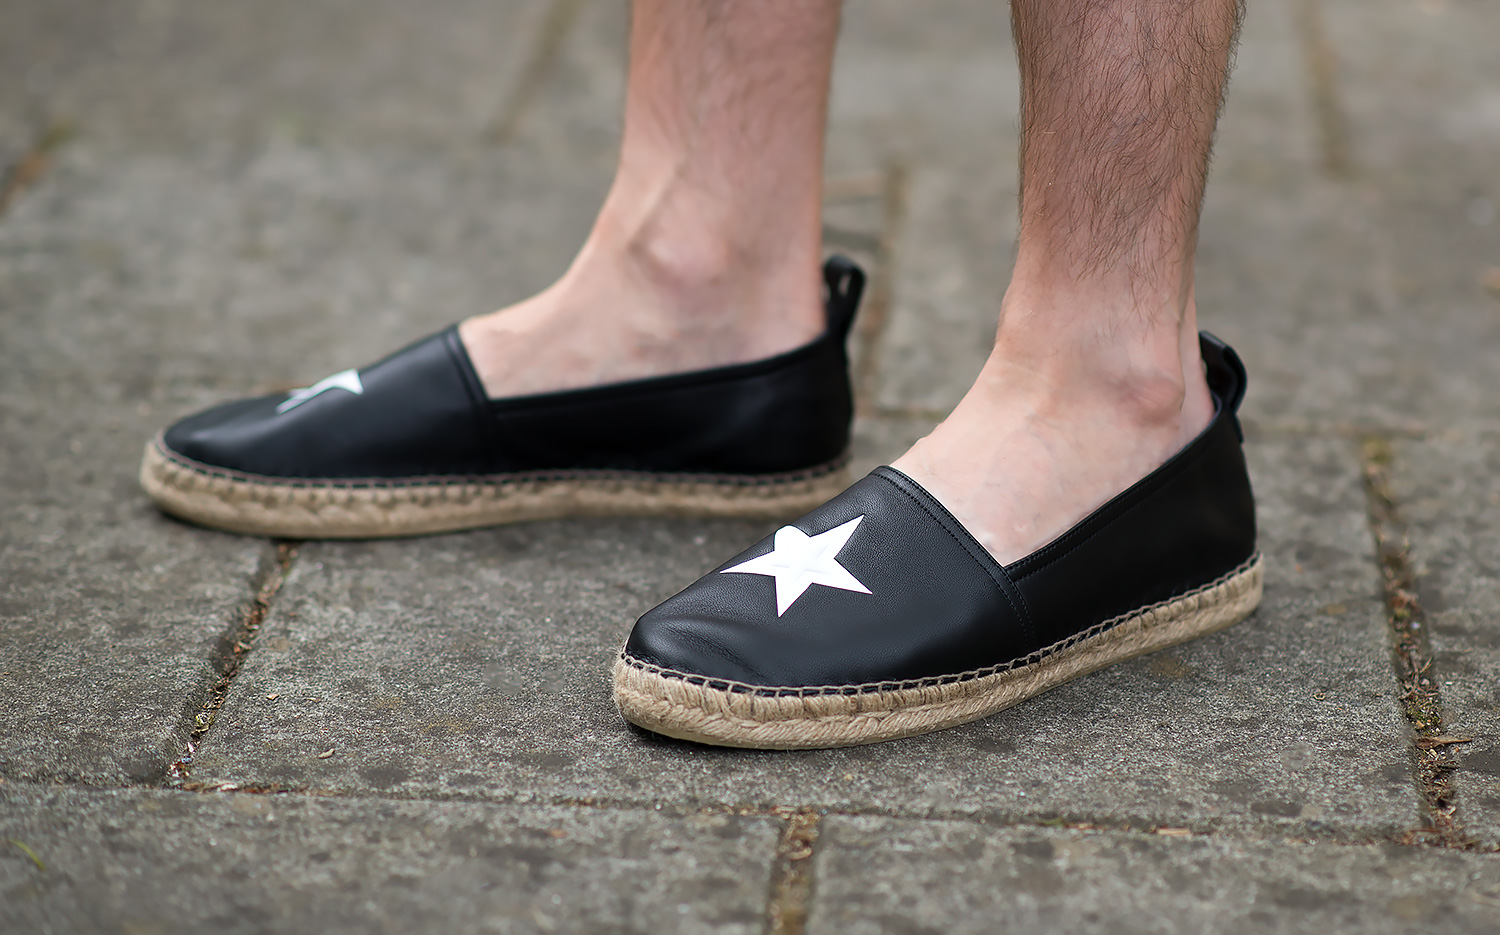 Givenchy Star Embossed Leather Espadrilles Review - Your Average Guy